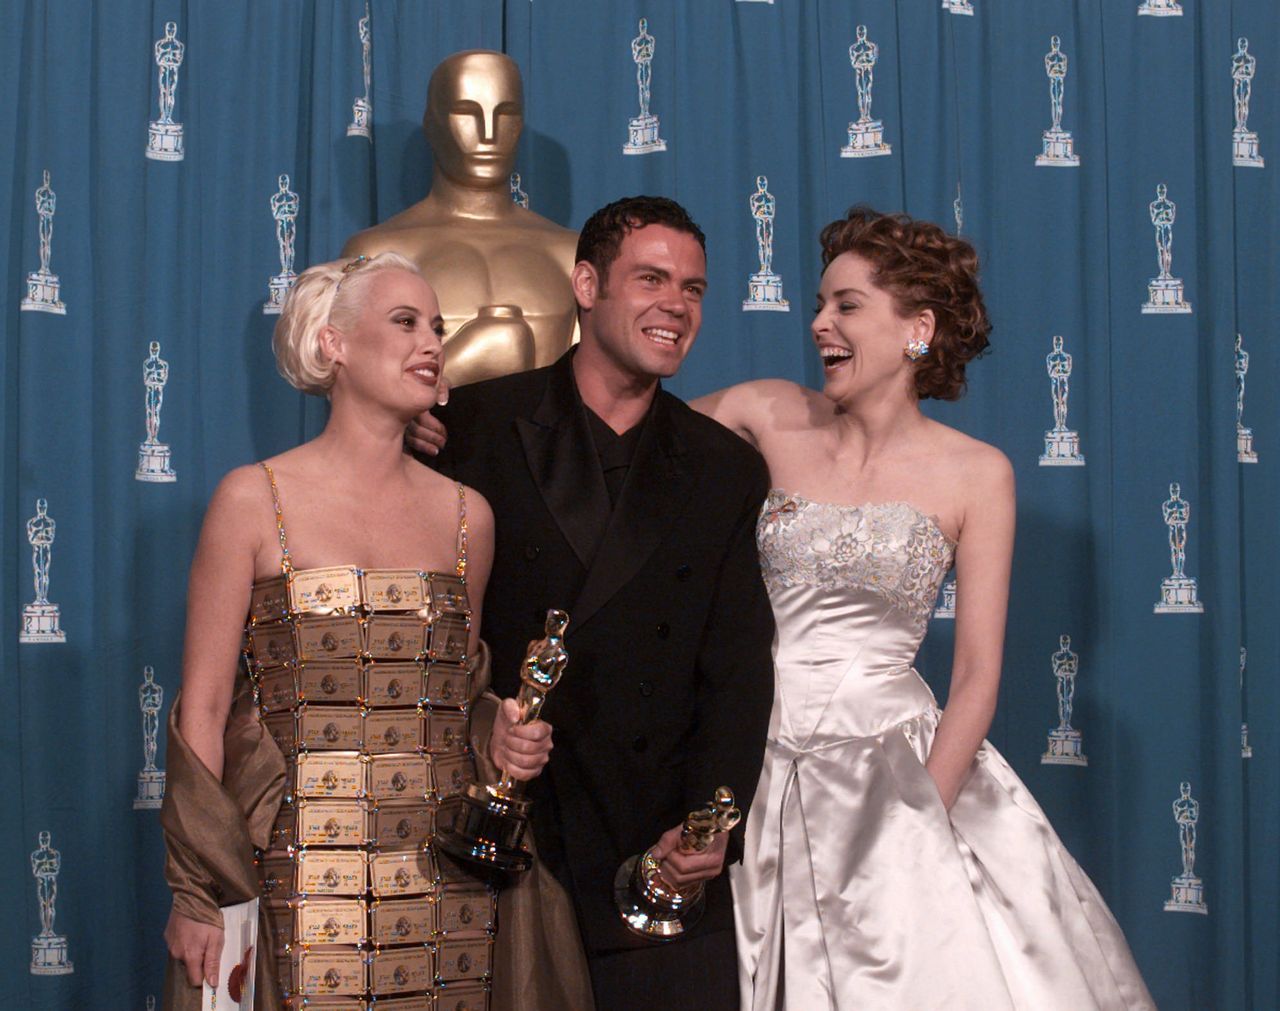 Lizzy Gardiner (left) and Tim Chappel, who won Best Costume Design in 1995, with presenter Sharon Stone.